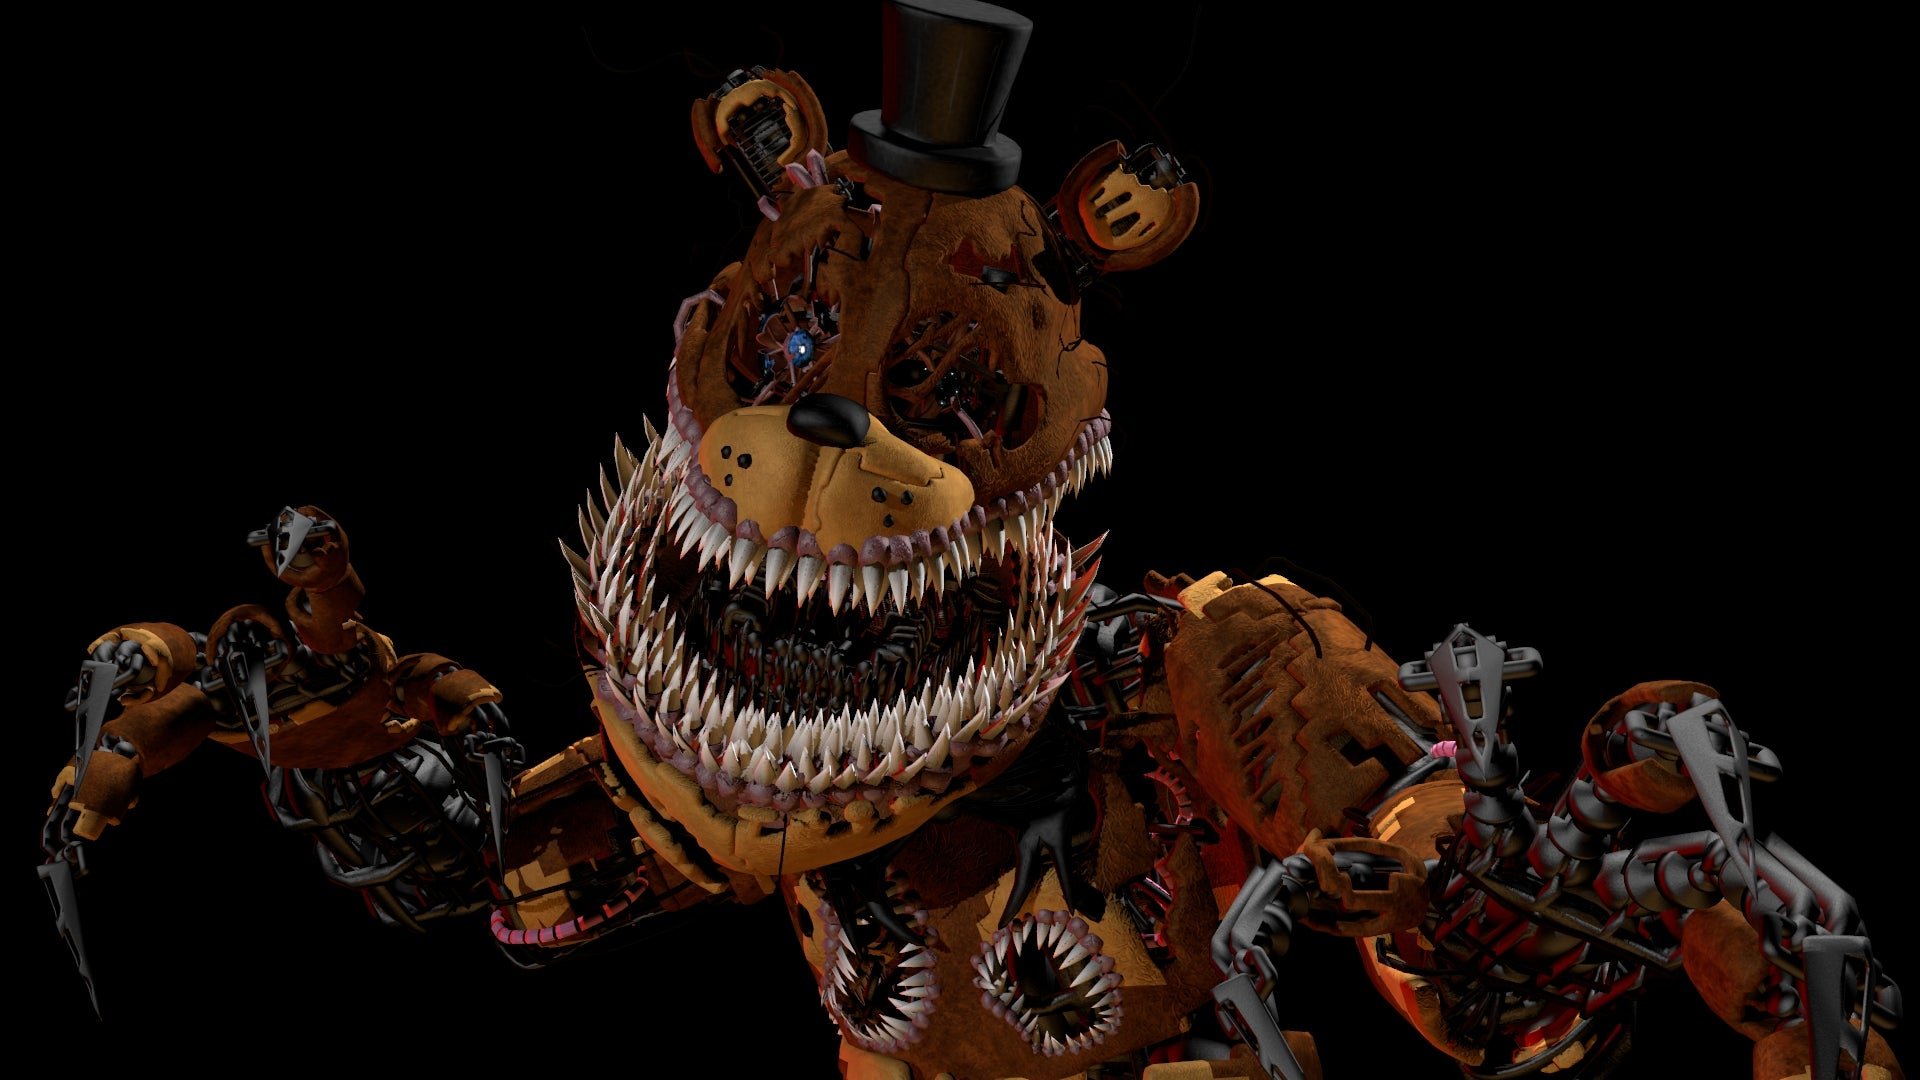 hello to all fnaf fans who love the fnaf universe can I ask a question? What is the difference between corrupted and corrupted v2 animators?